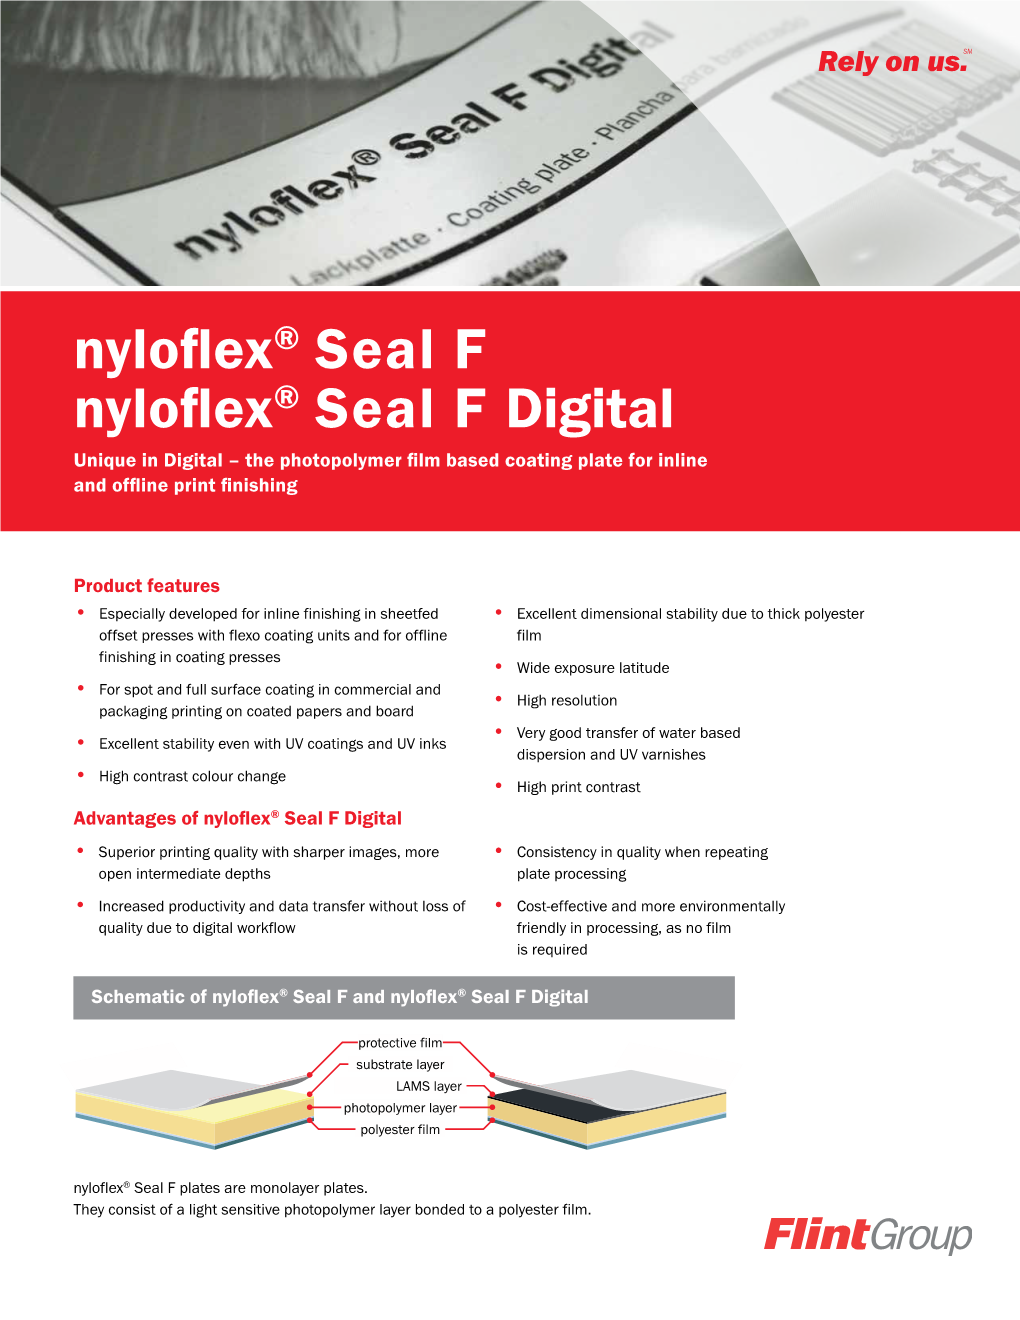 Nyloflex® Seal F Nyloflex® Seal F Digital Unique in Digital – the Photopolymer Film Based Coating Plate for Inline and Offline Print Finishing